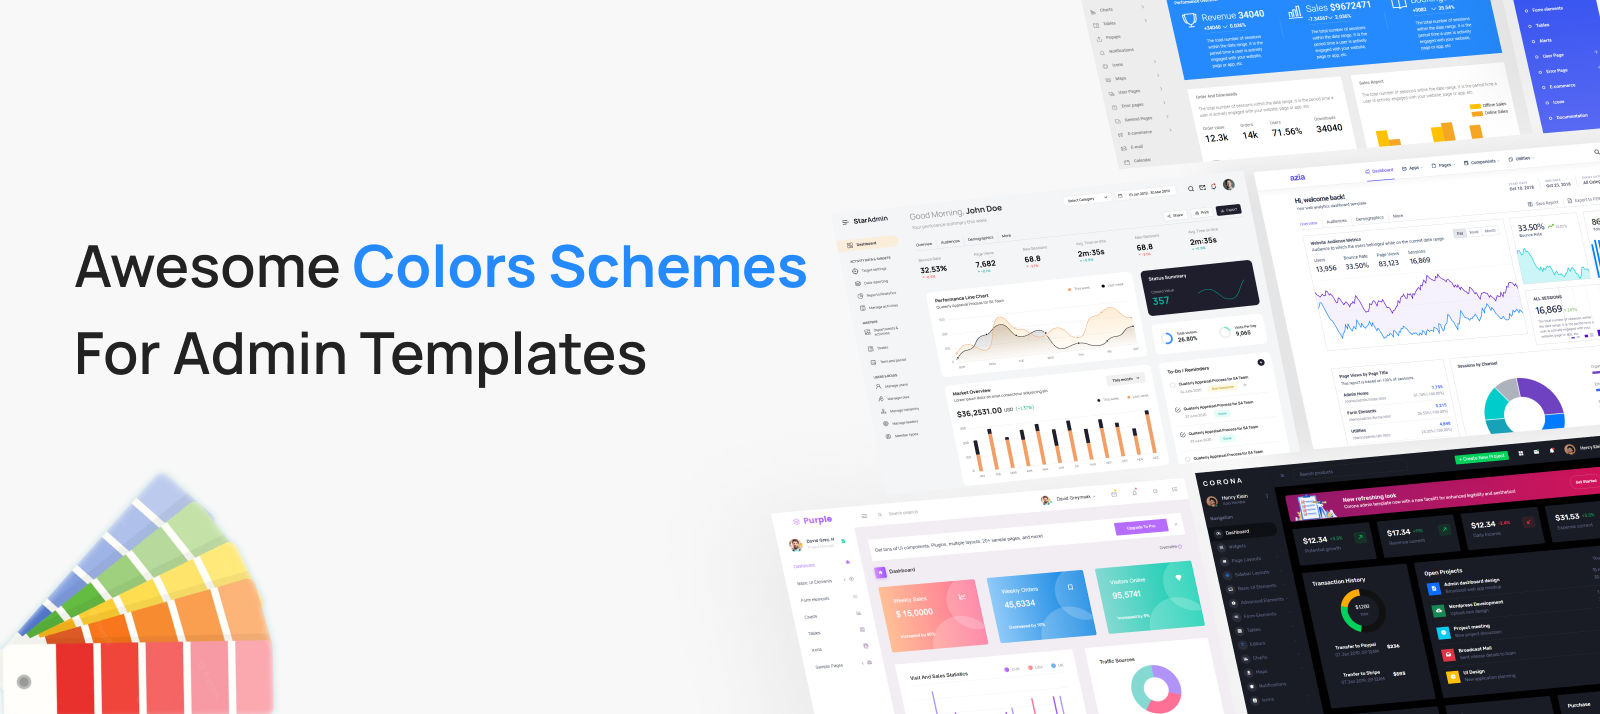  10 Awesome Color Schemes for Admin Templates